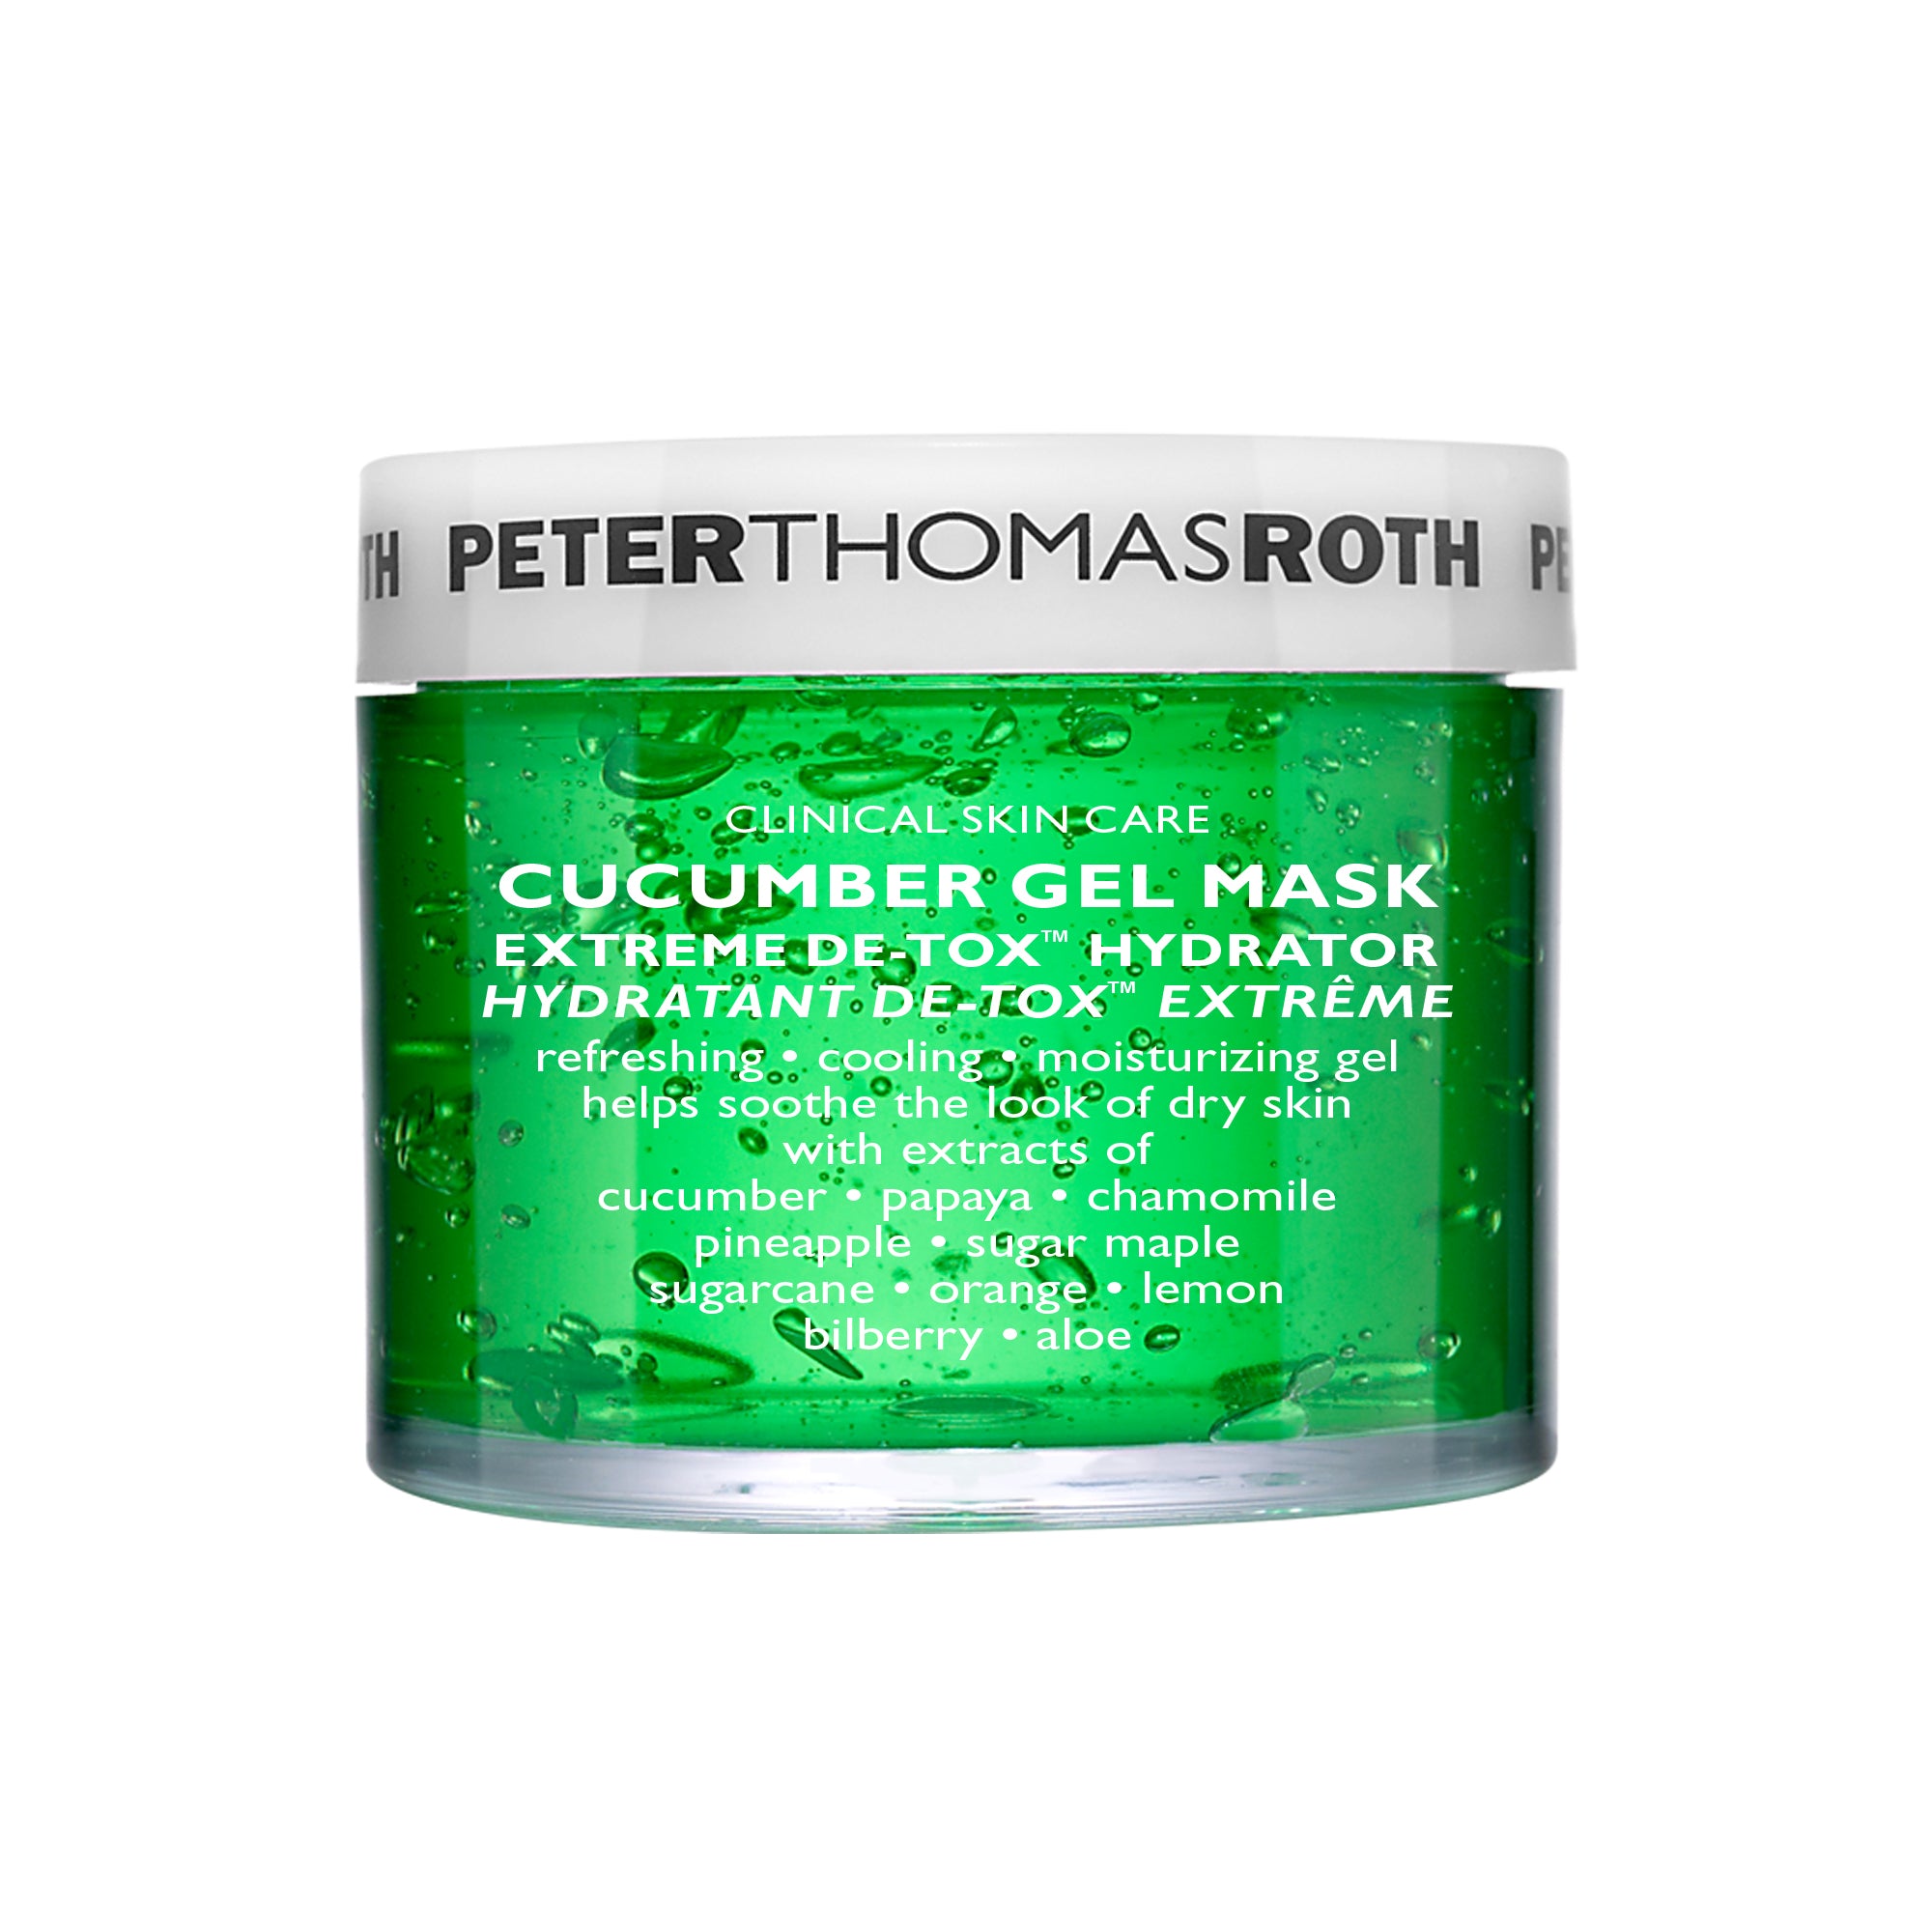 Cucumber Gel Mask Extreme De-Tox™ Hydrator image 9